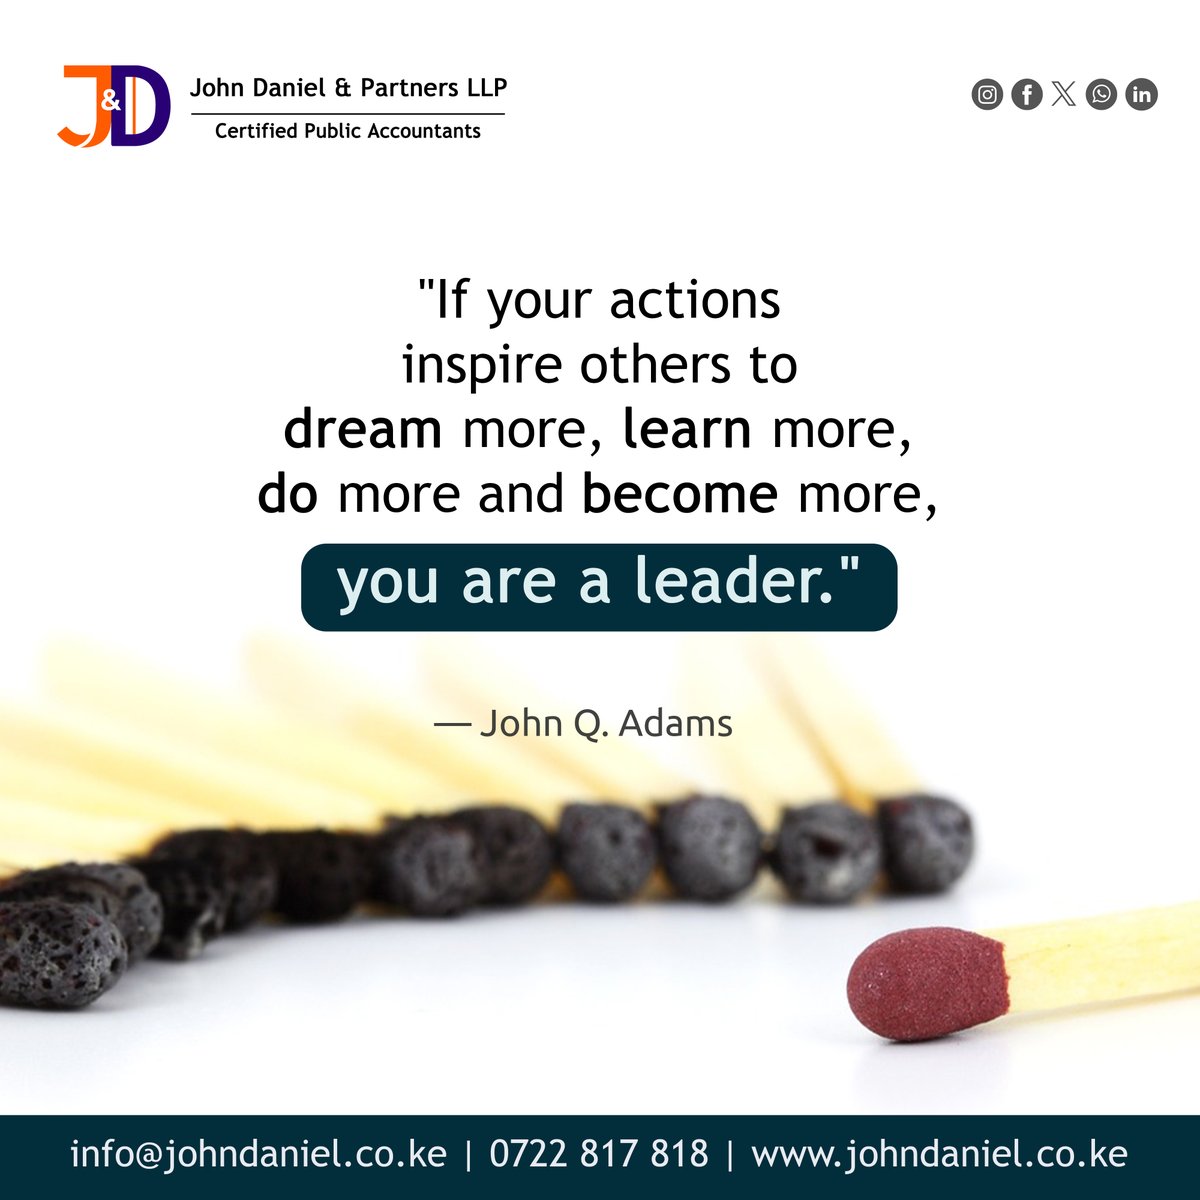 'If your actions inspire others to dream more, learn more,do more and become more, you are a leader.'

Accounting | Tax | Audit | Advisory
#Business #Leadership #BusinessLeadership #MondayMotivation